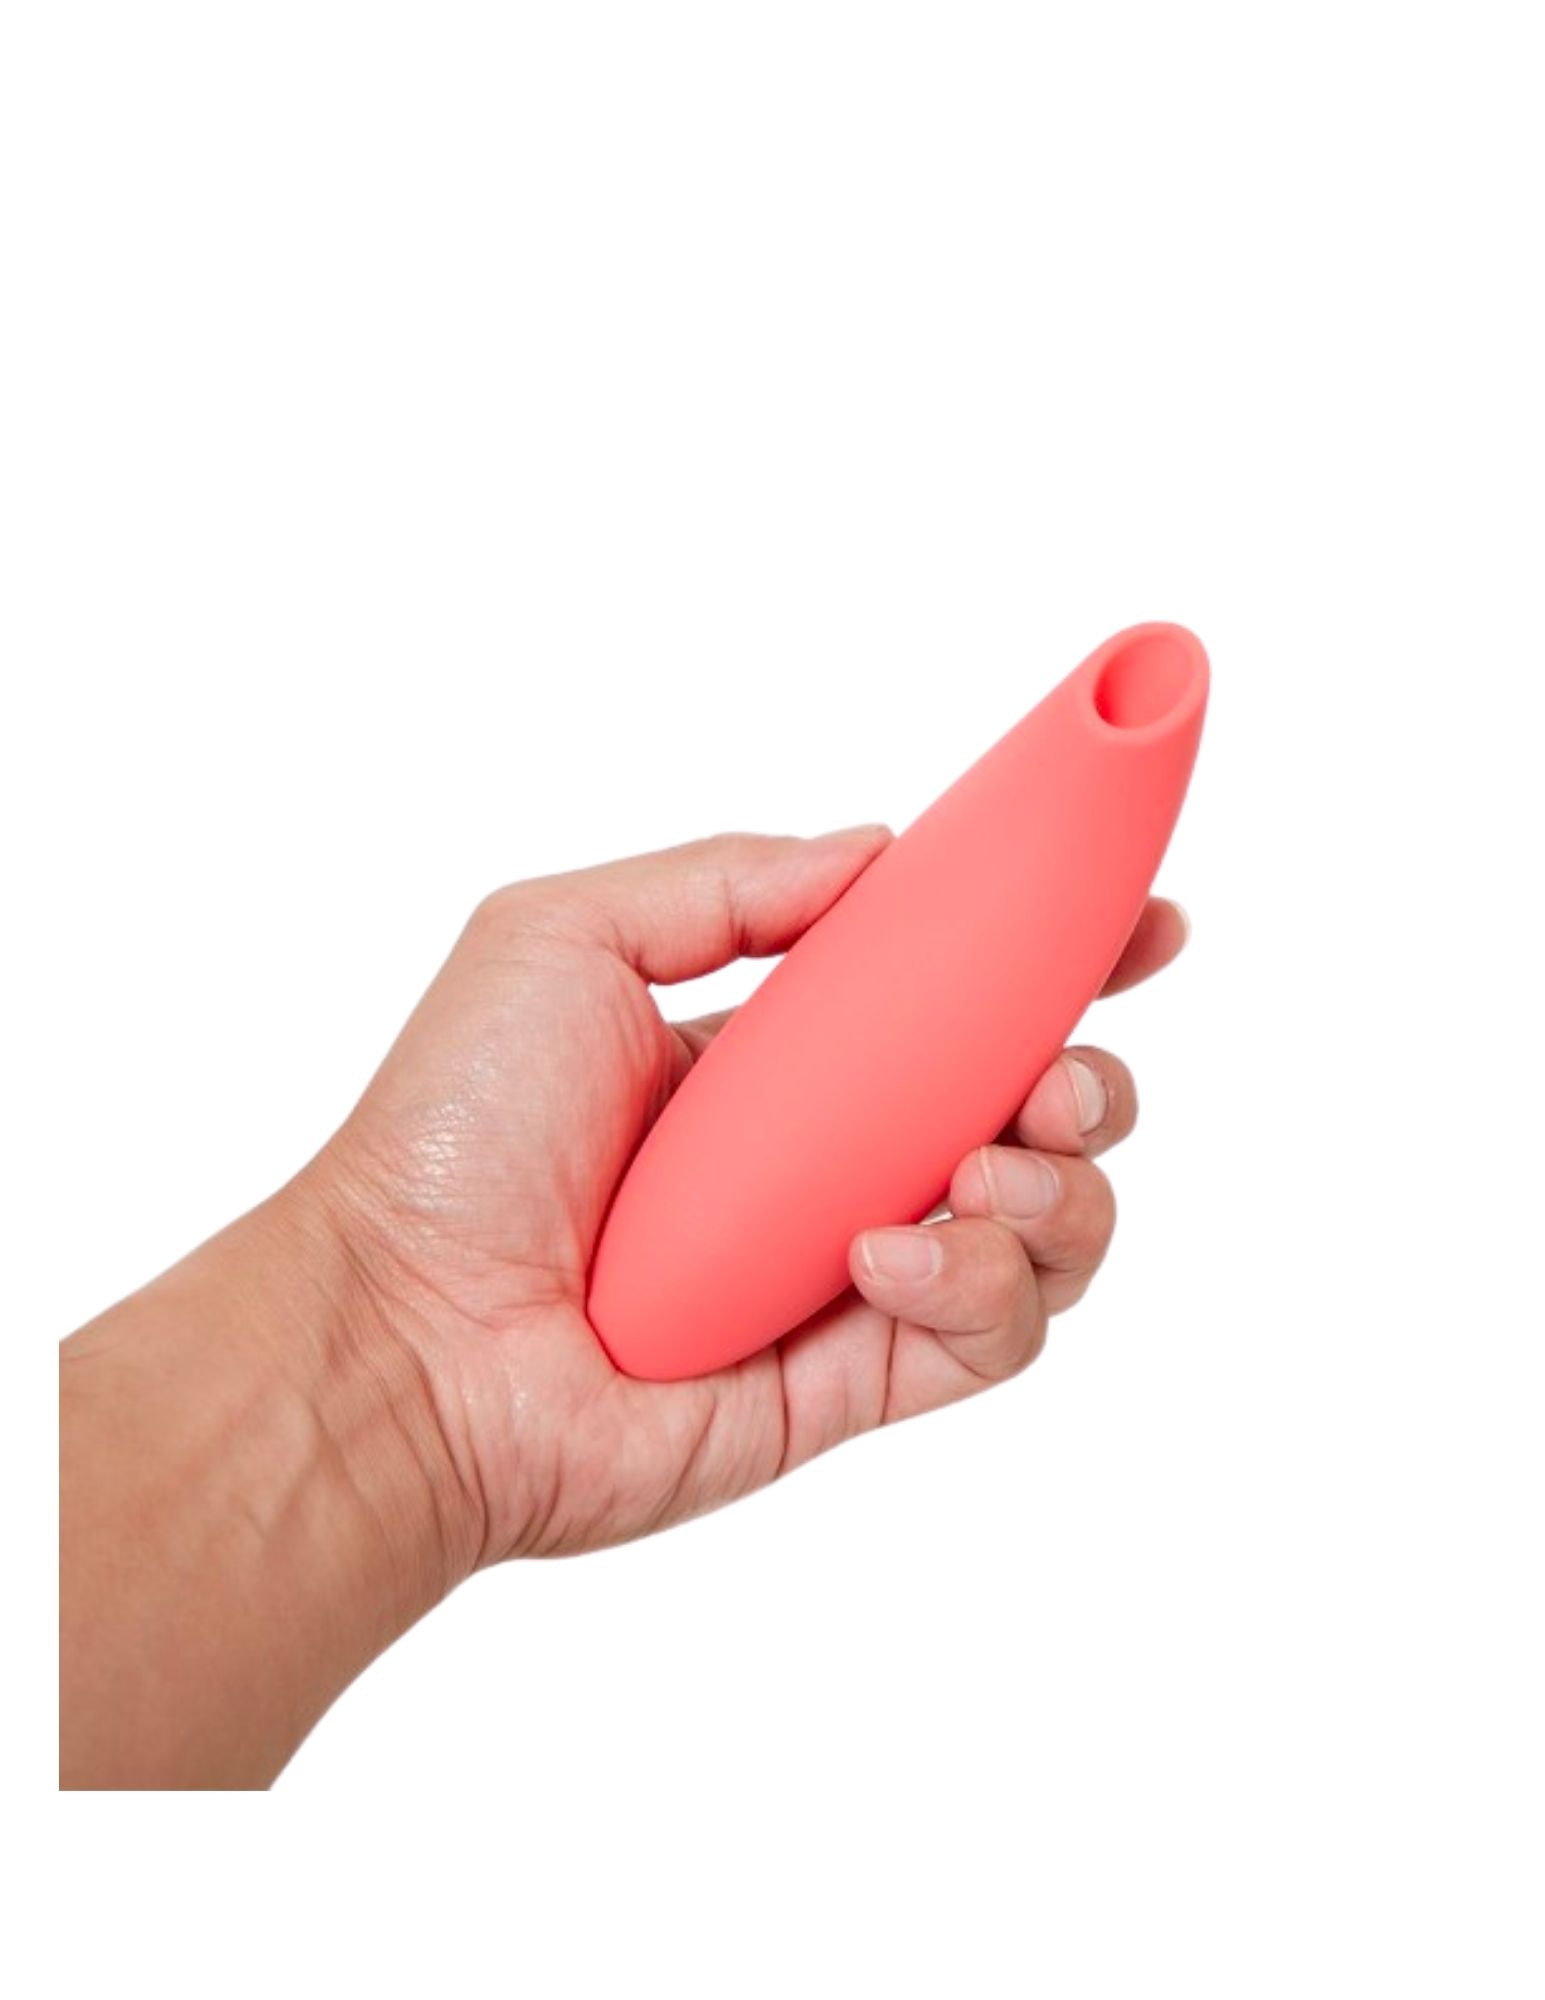 The Best 8 Clit Sucking Sex Toys [You'll Love Them!] - Thetoy.org Diaries